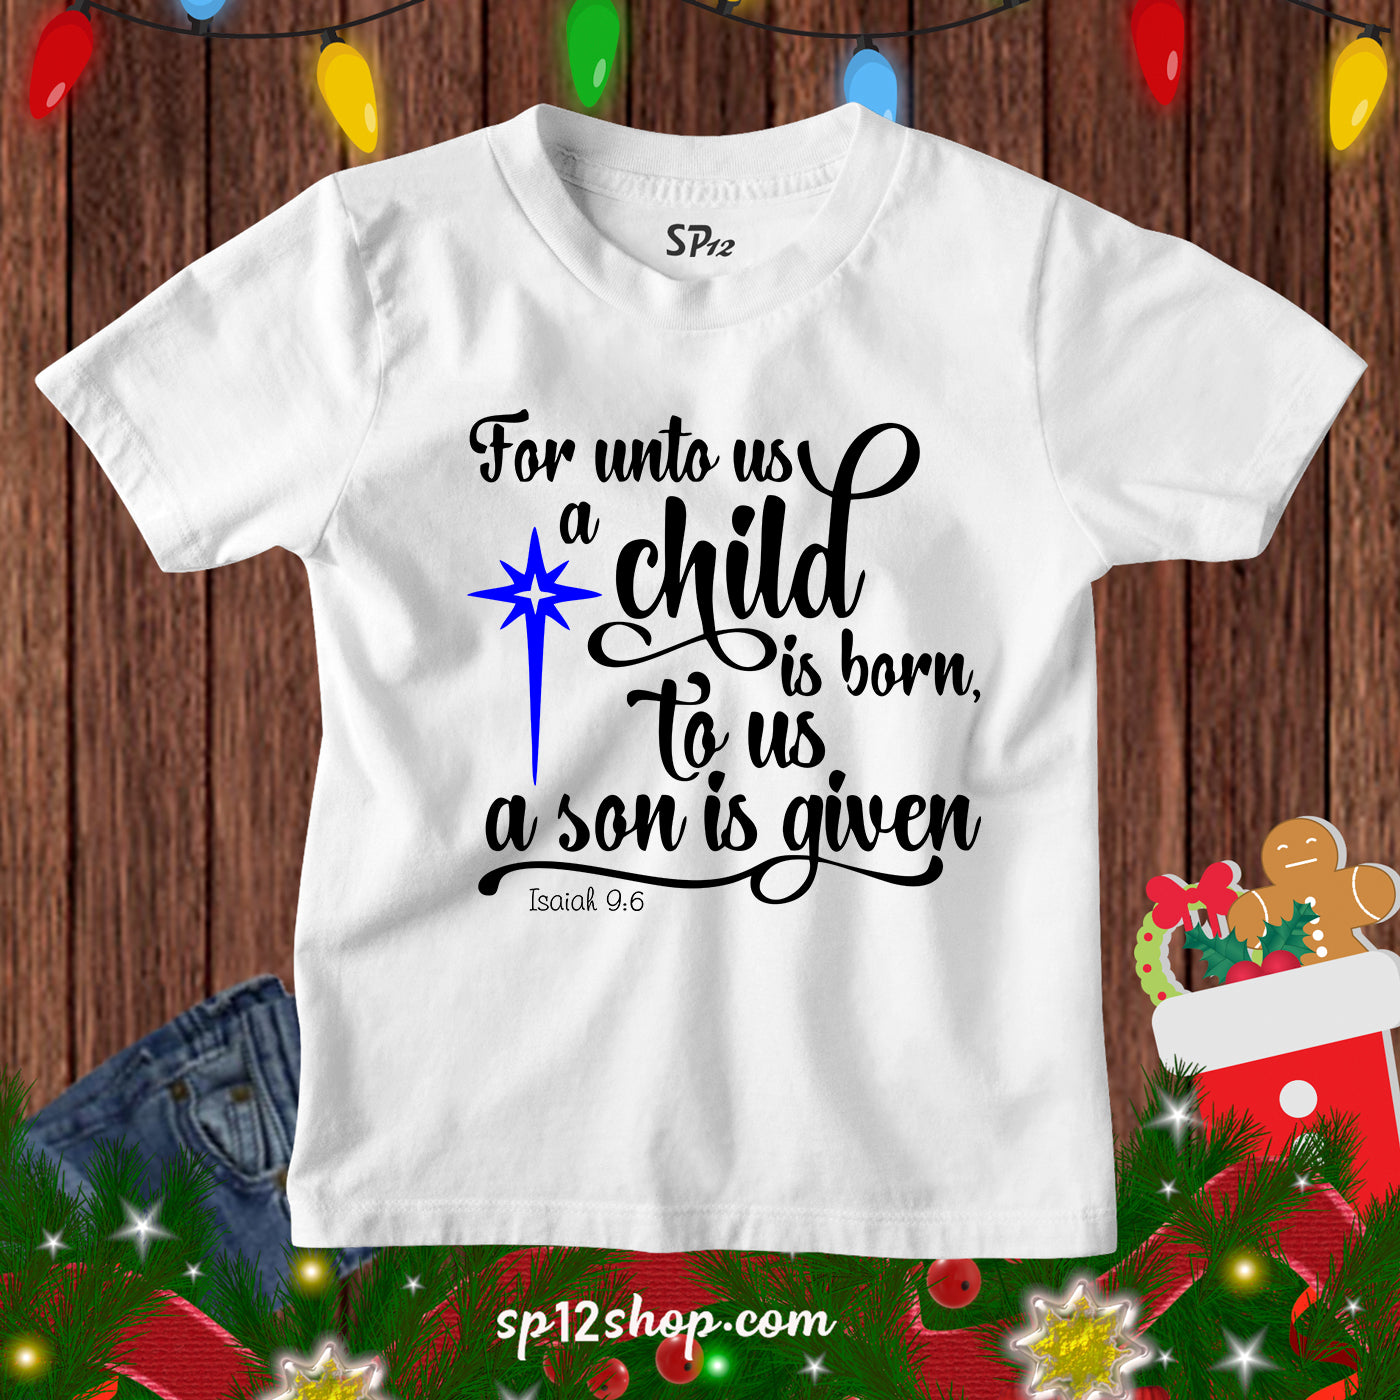 Child Is Born to us Christmas Bible Verse Kids t Shirt